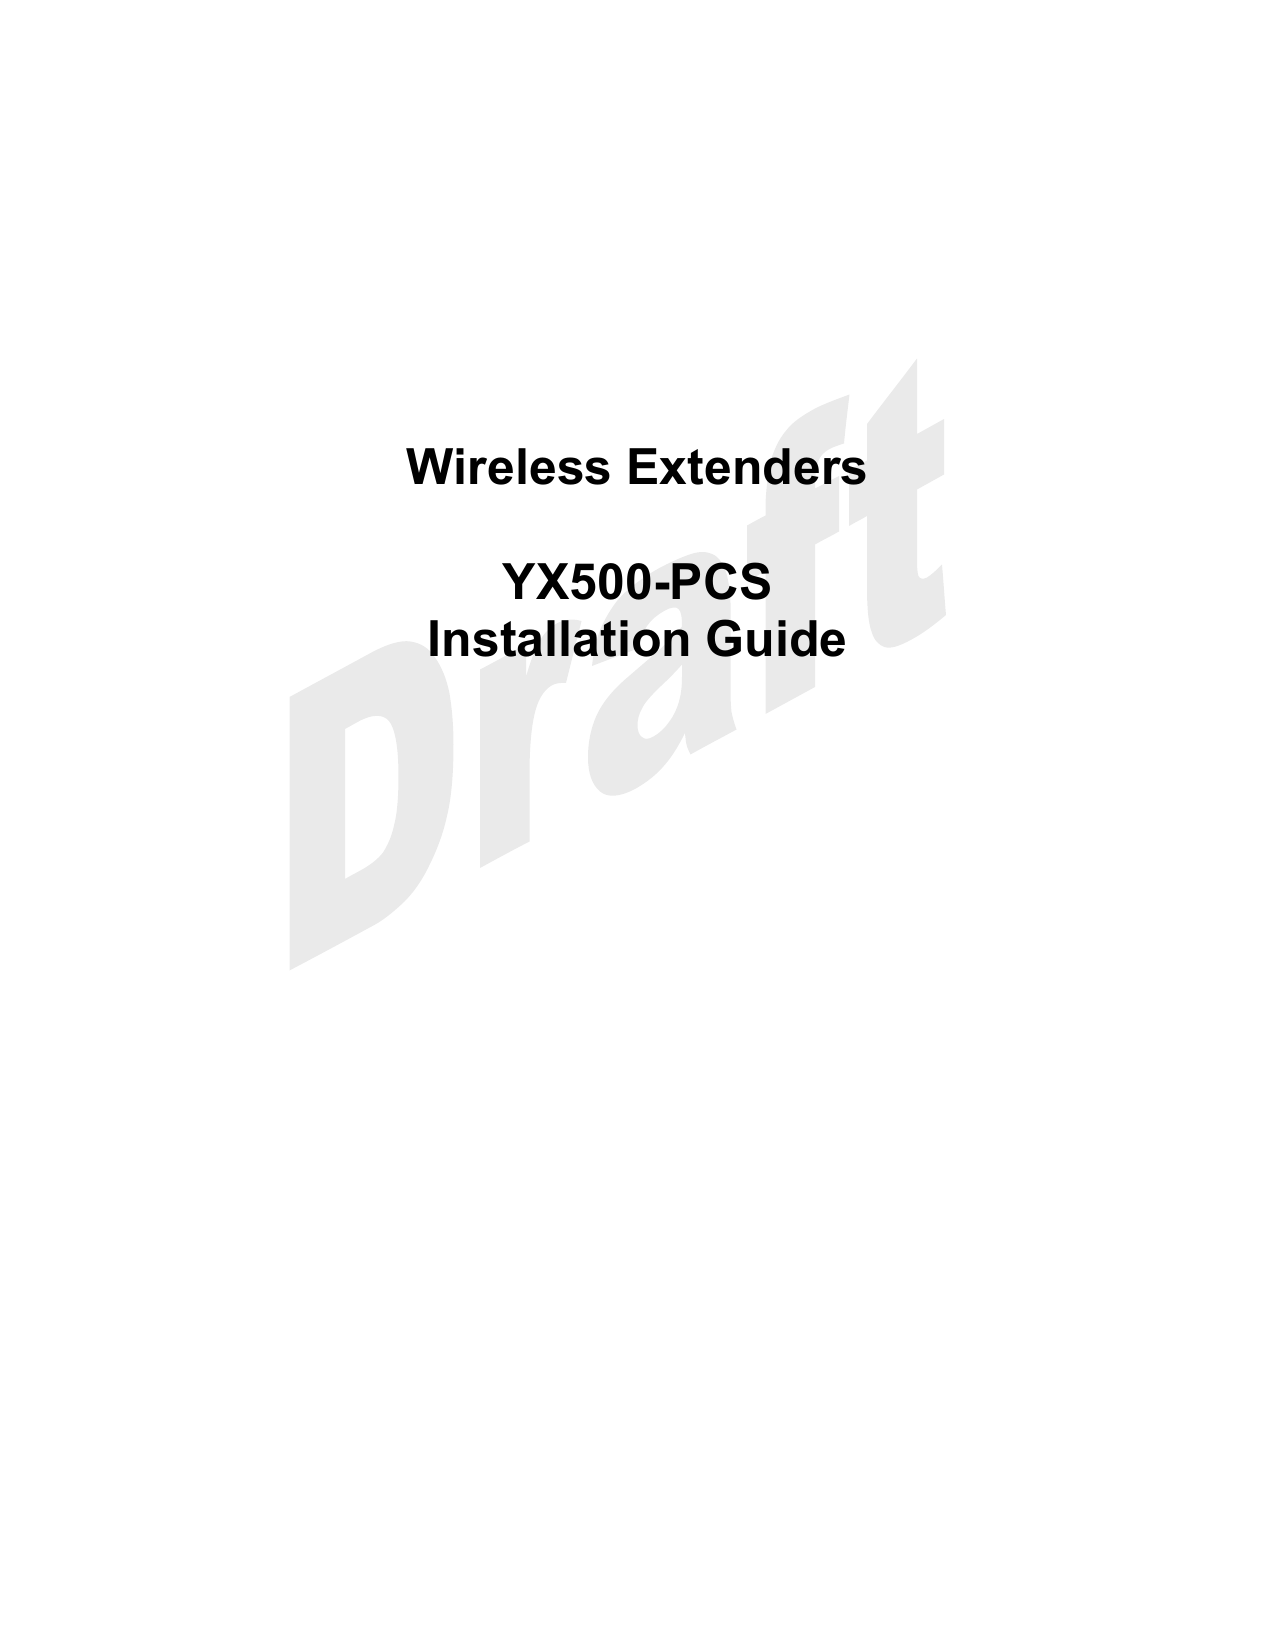            Wireless Extenders  YX500-PCS Installation Guide 